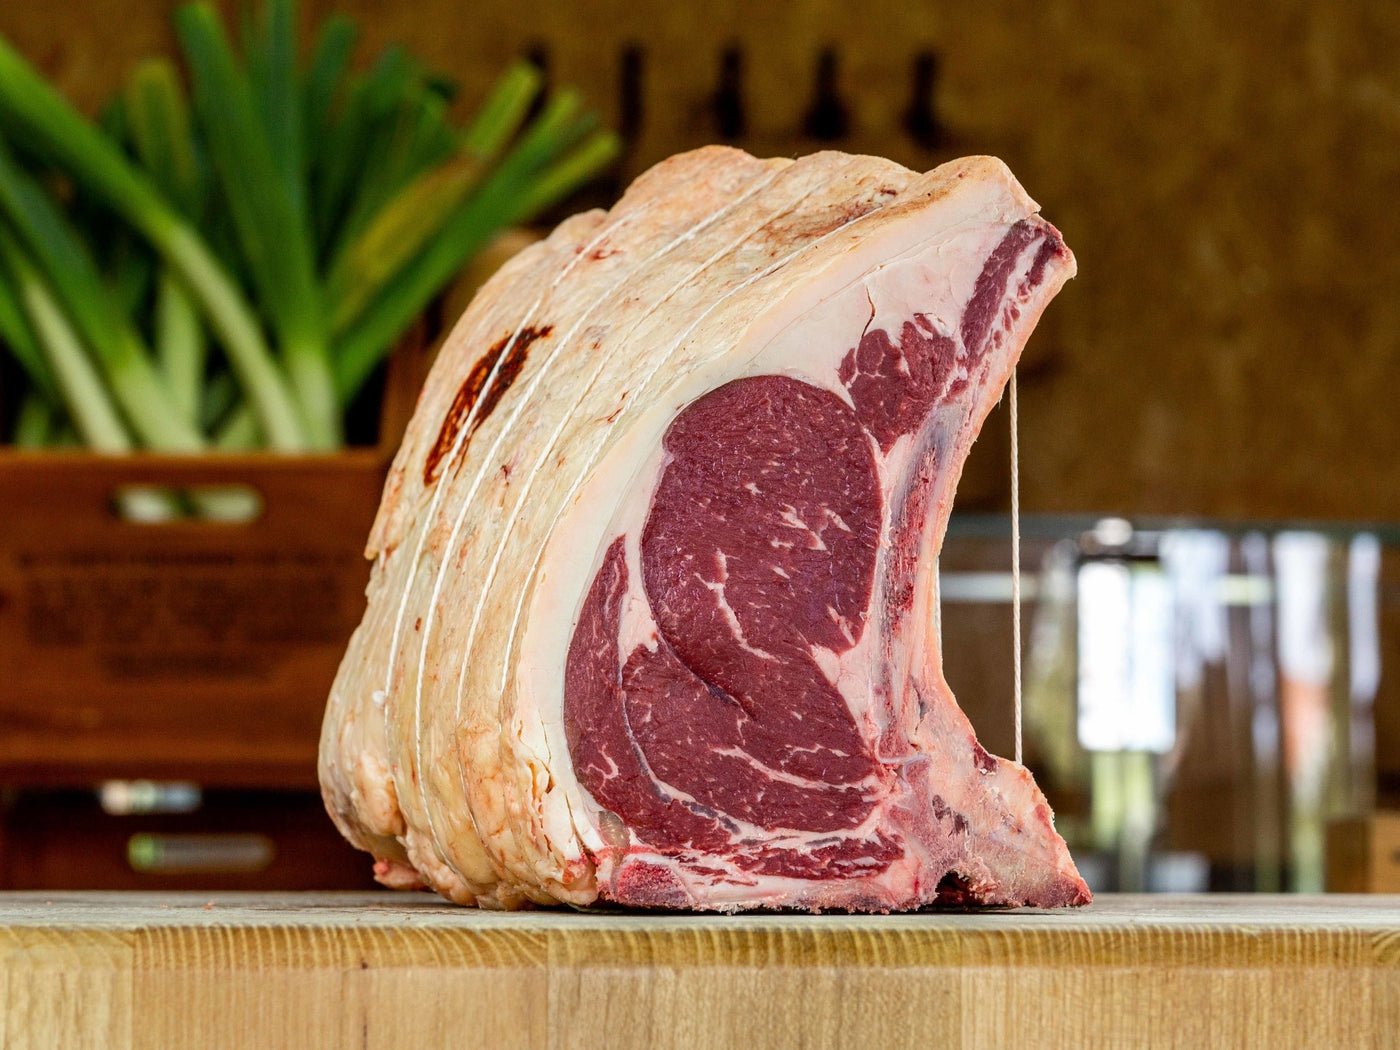 Grass Fed, Dry-Aged Wing Rib Roast - Beef - Thomas Joseph Butchery - Ethical Dry-Aged Meat The Best Steak UK Thomas Joseph Butchery